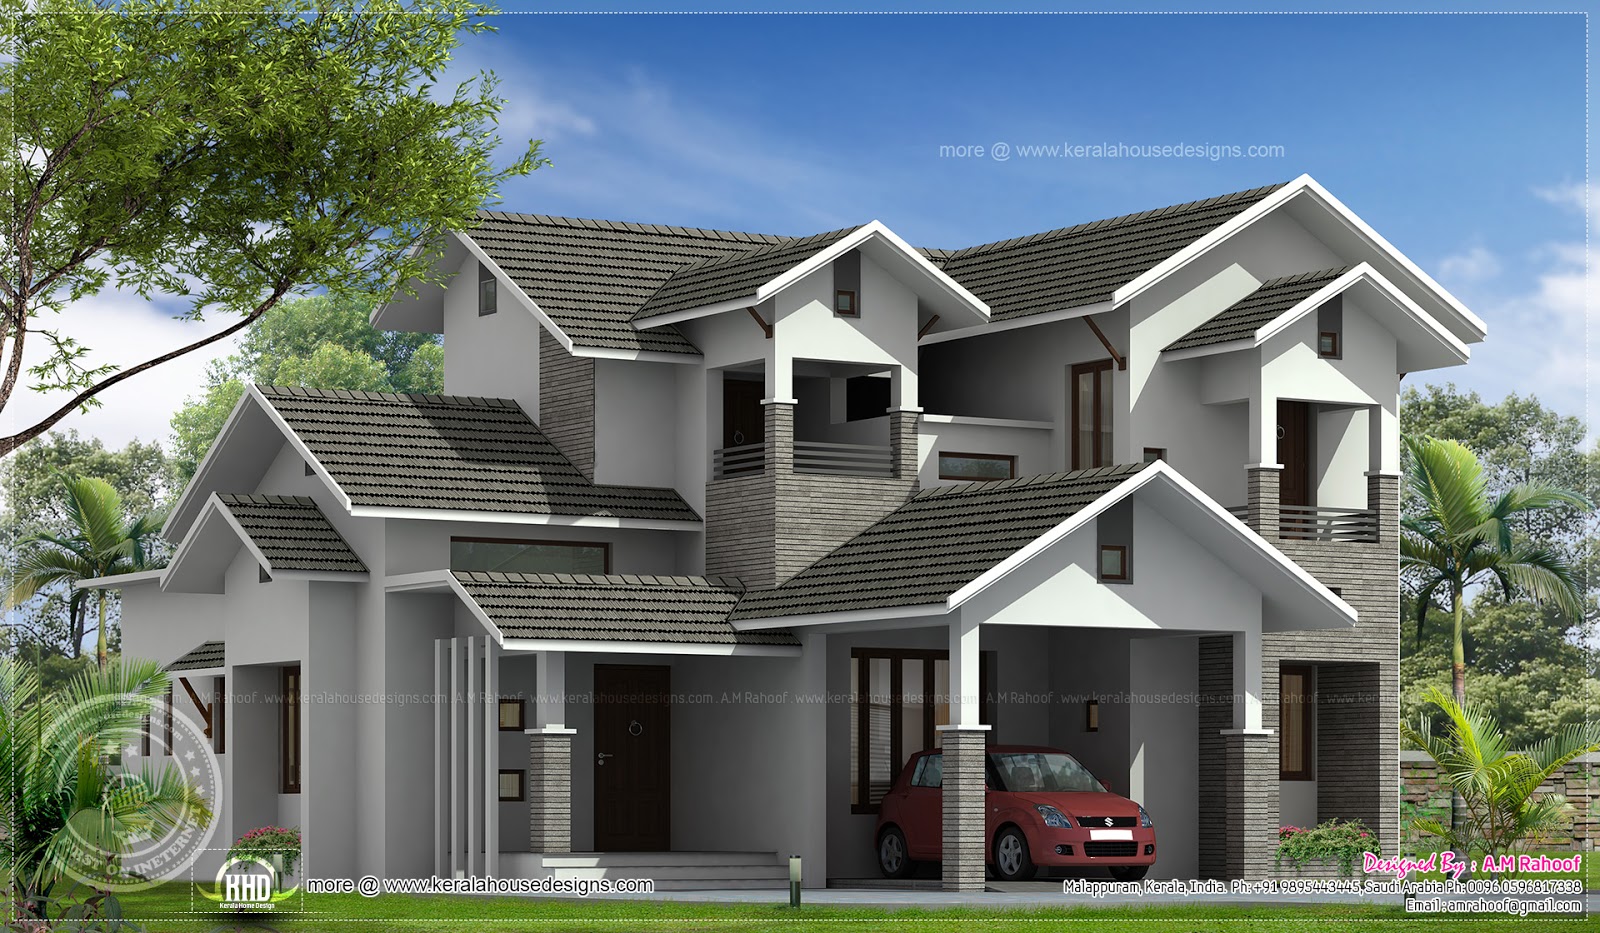 Double storied sloping roof home  design  Home  Kerala  Plans 